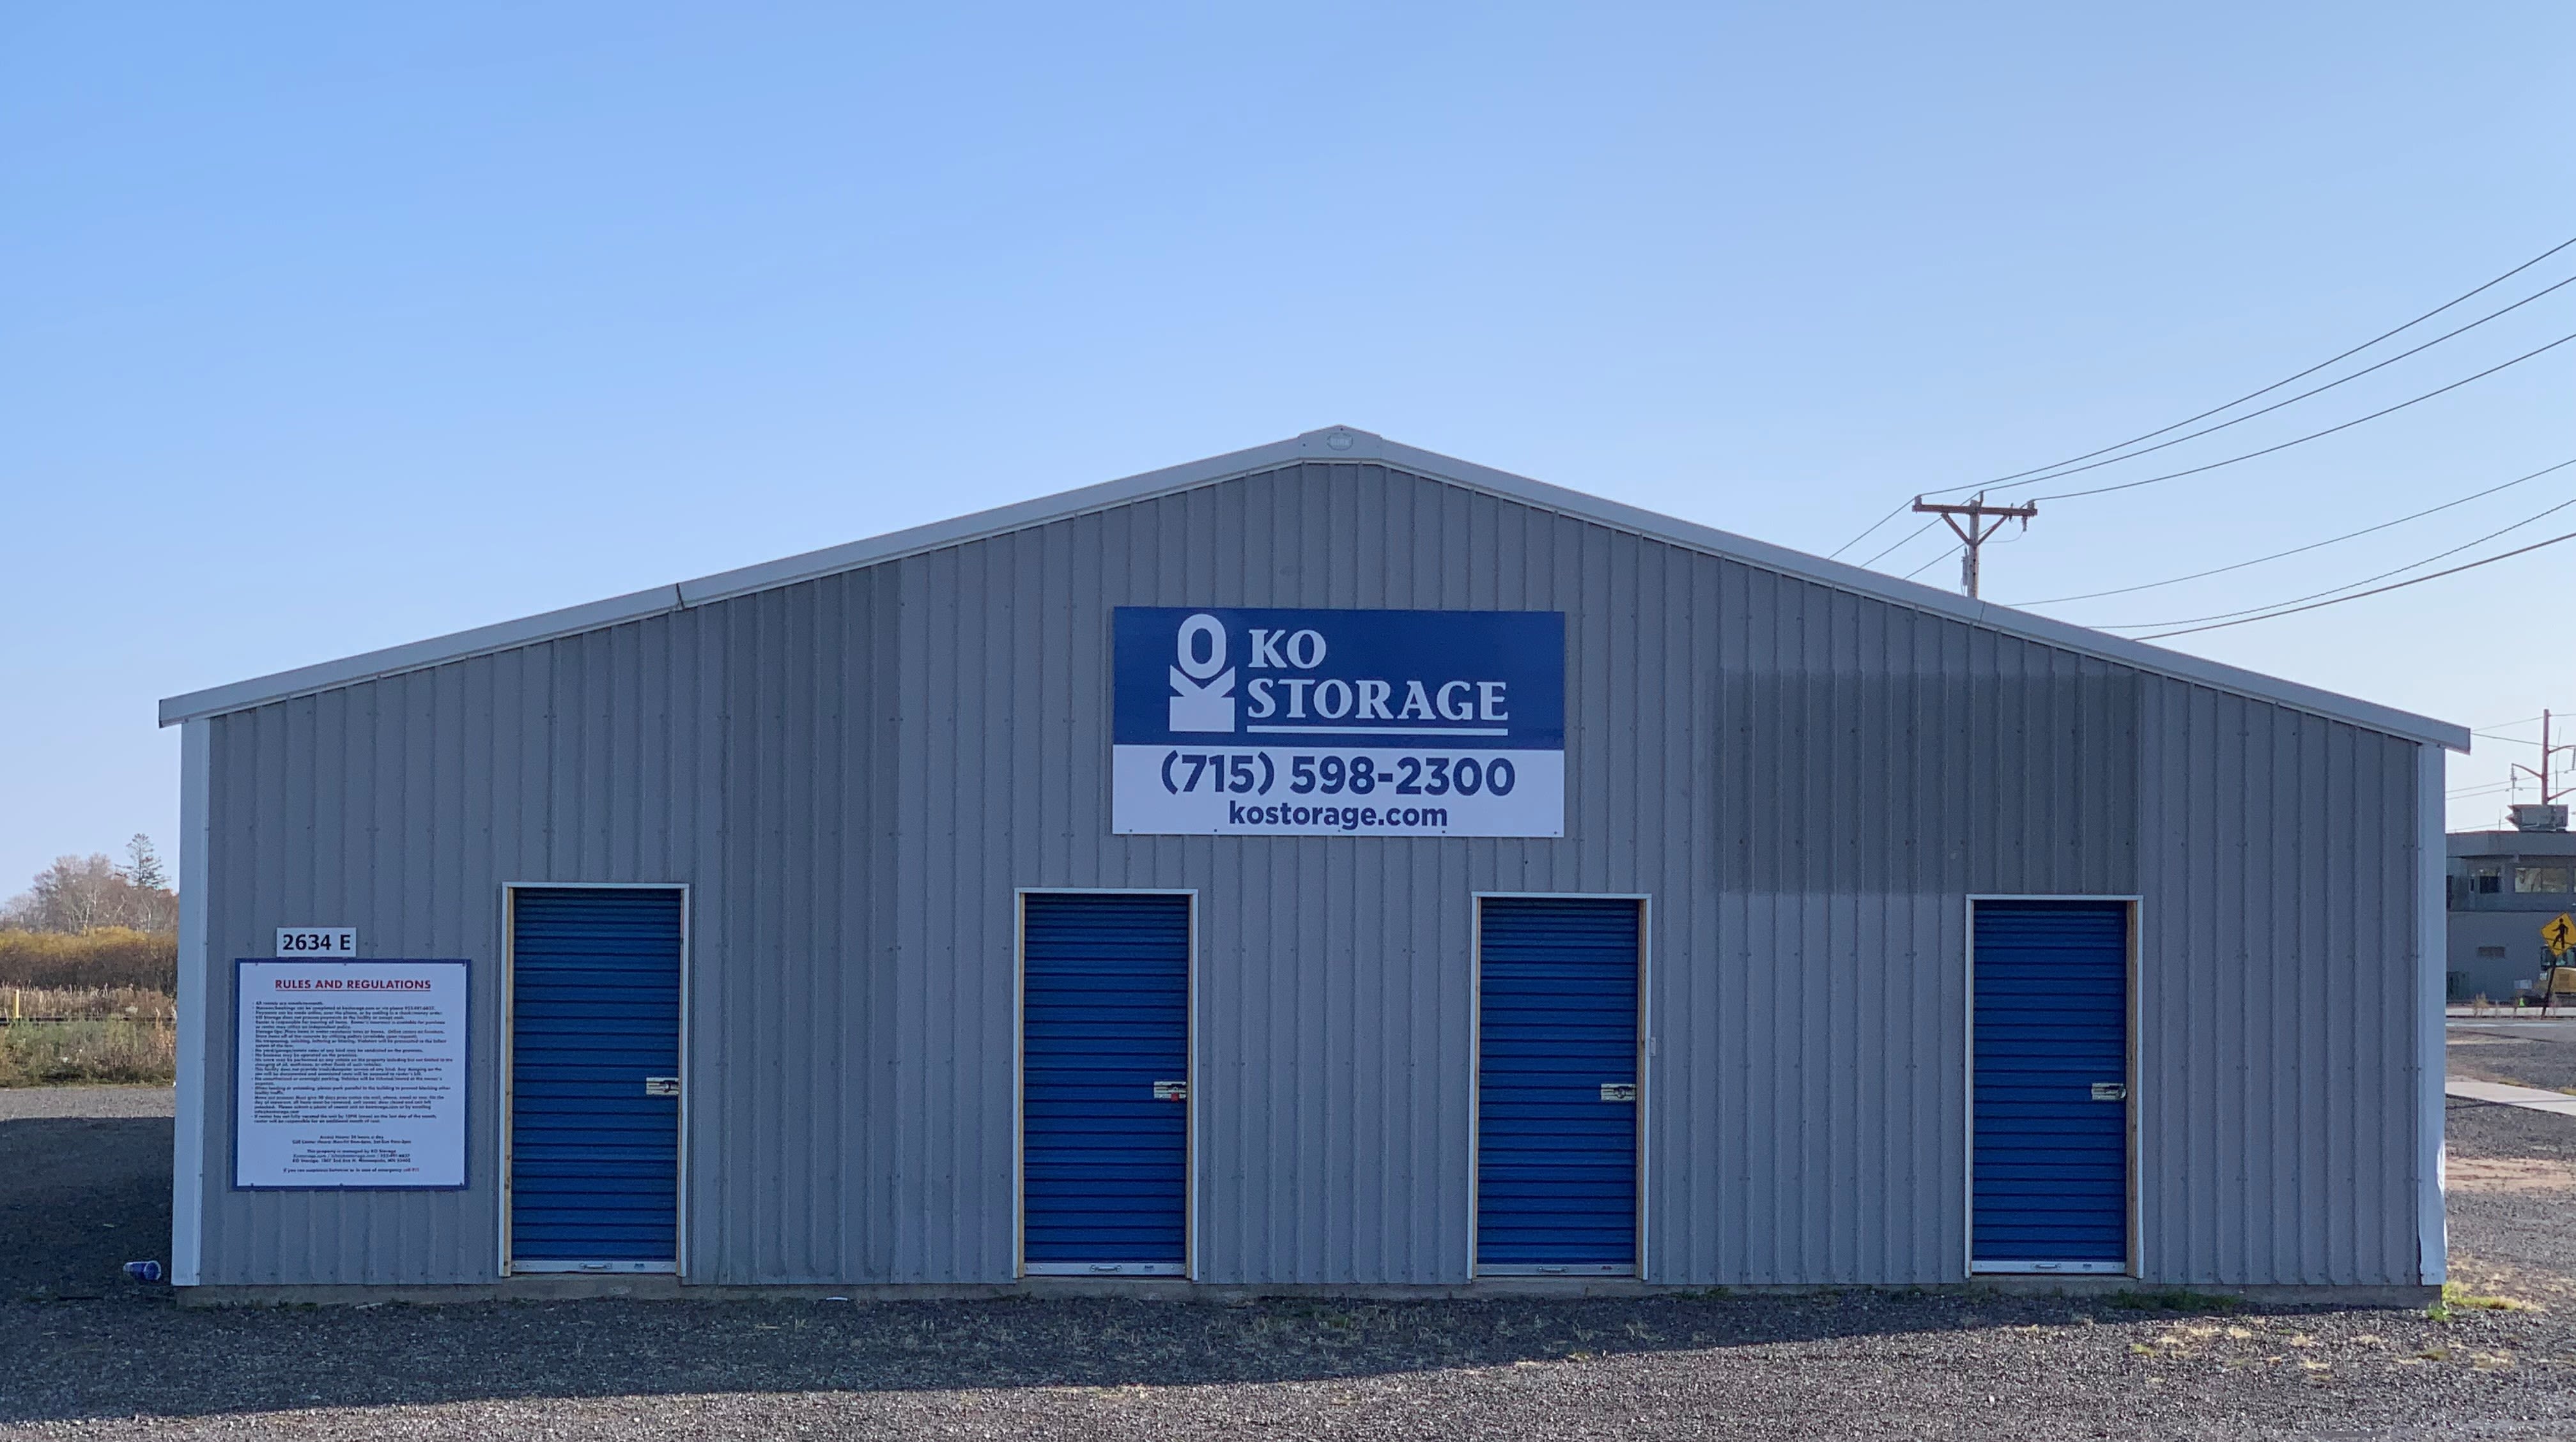 Map and directions to KO Storage in Superior, Wisconsin